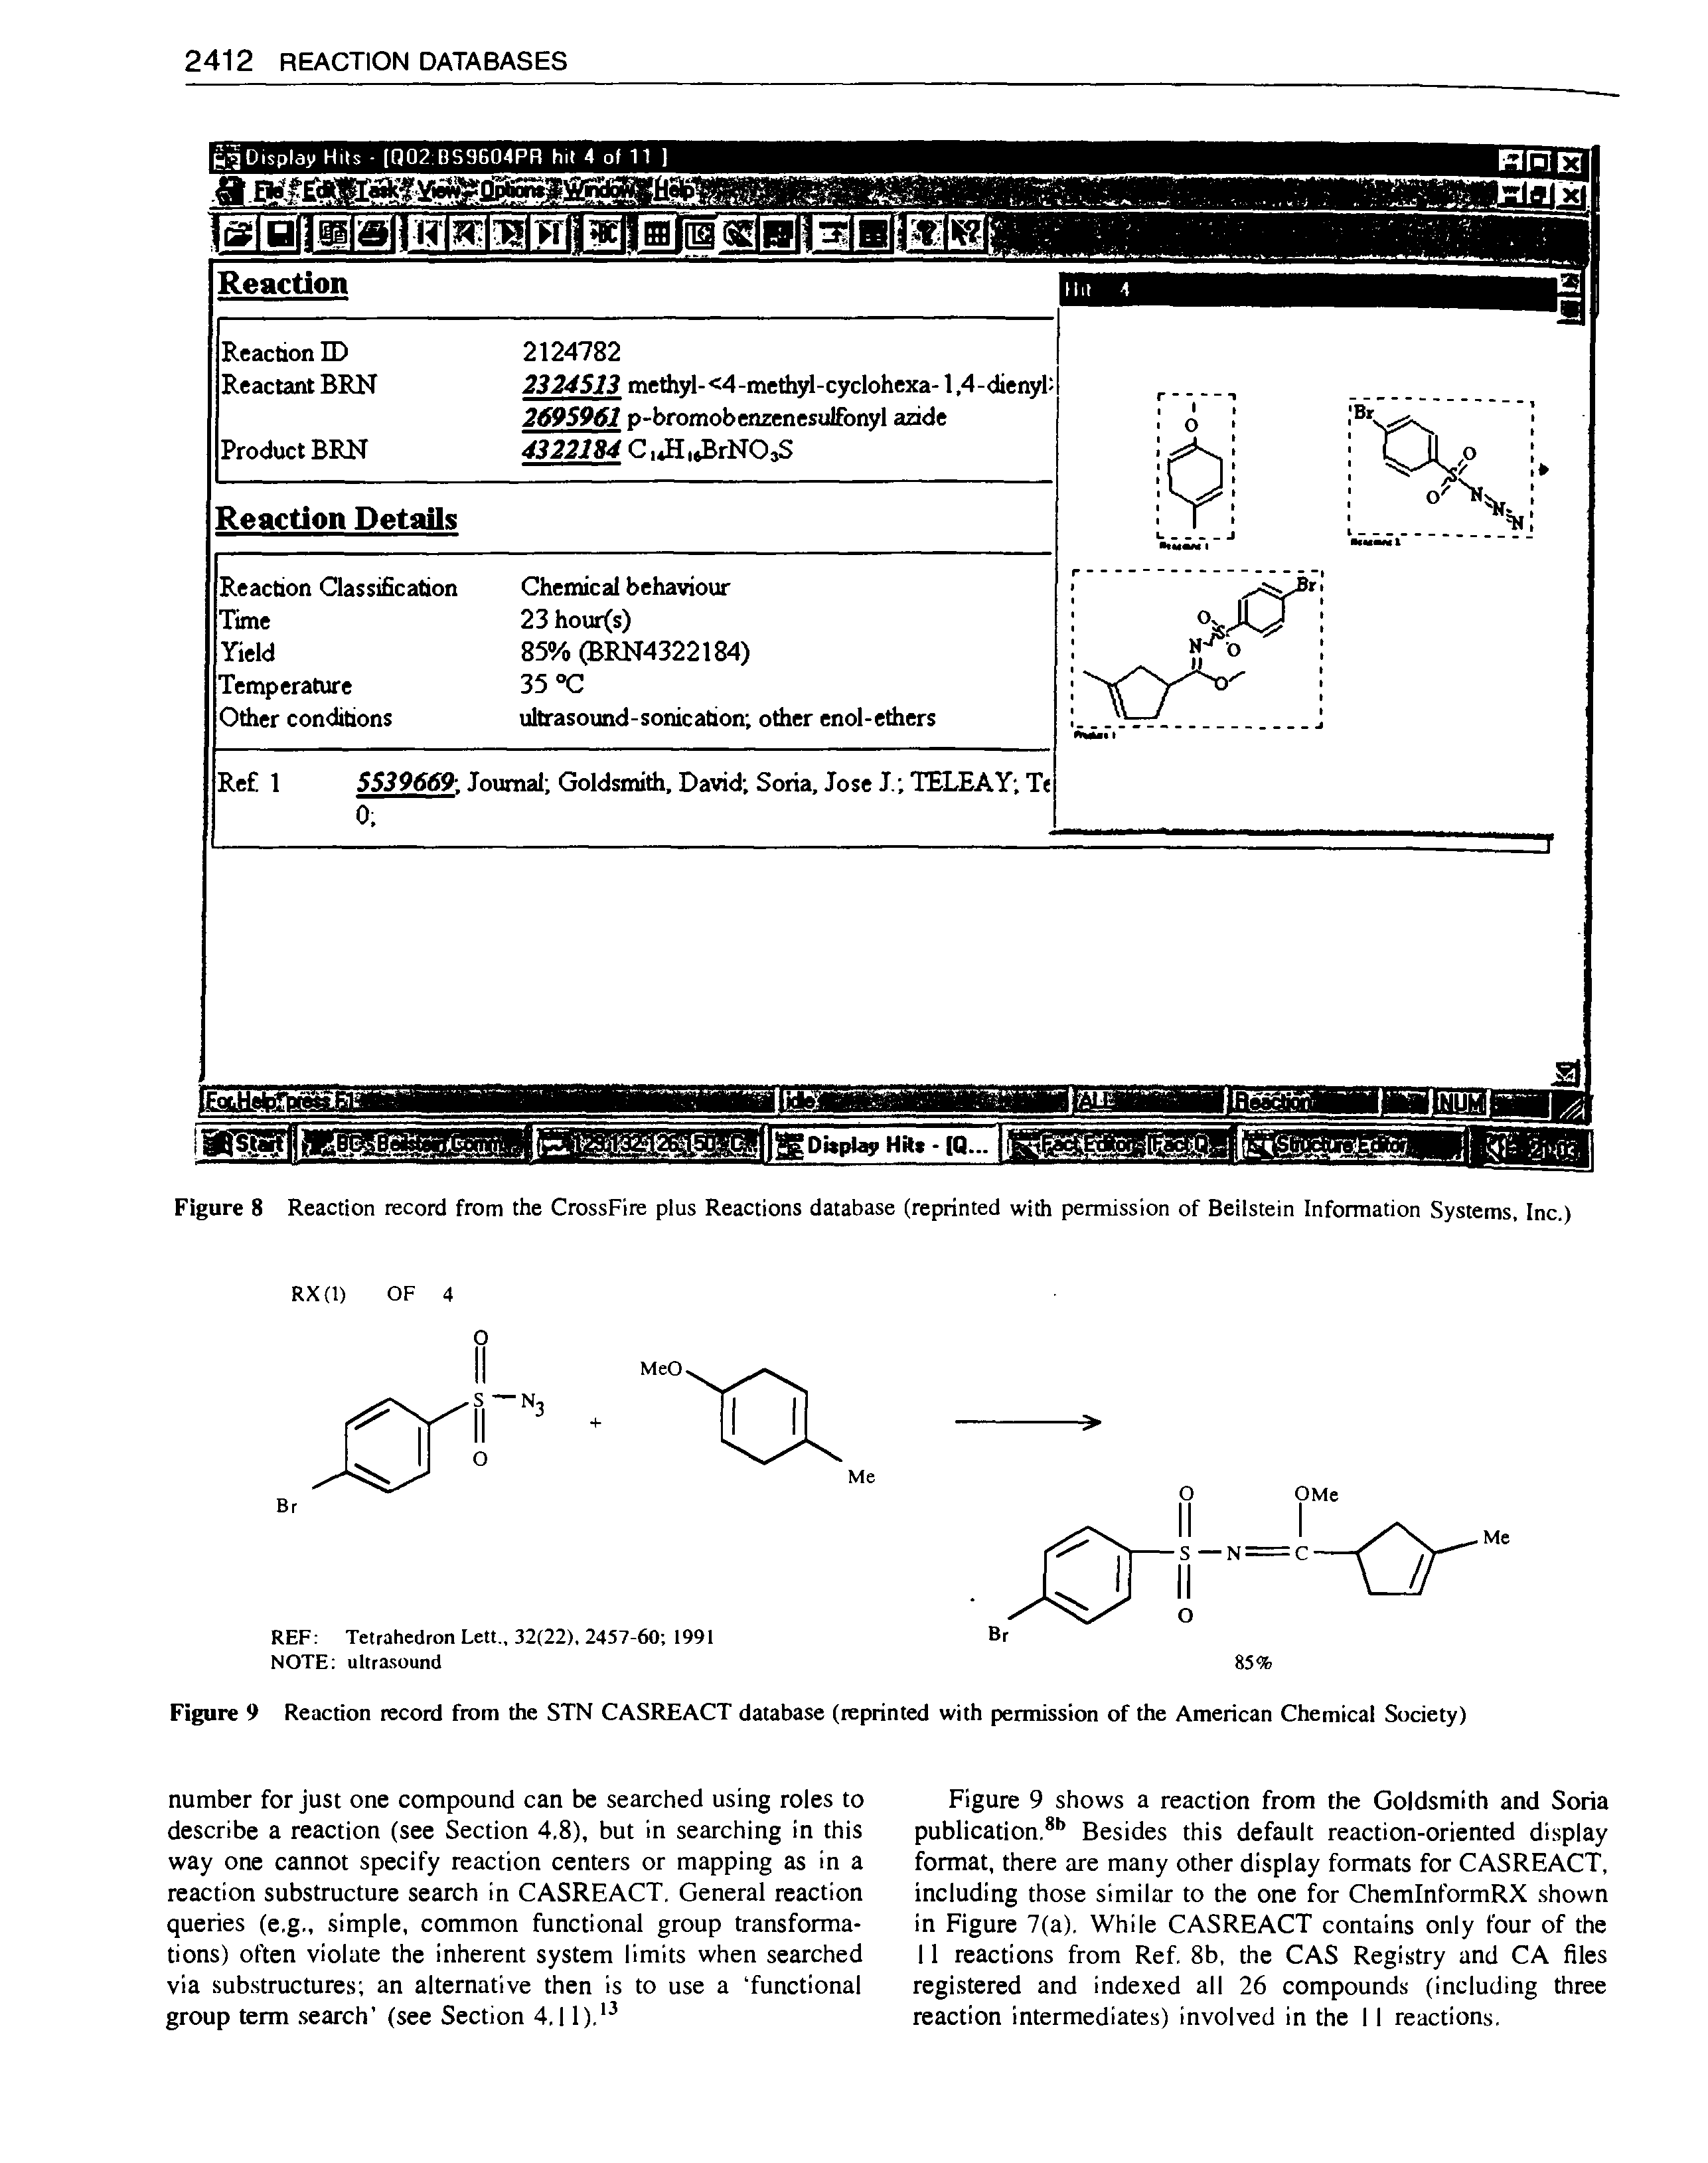 Figure 8 Reaction record from the CrossFire plus Reactions database (reprinted with permission of Beilstein Information Systems. Inc.)...